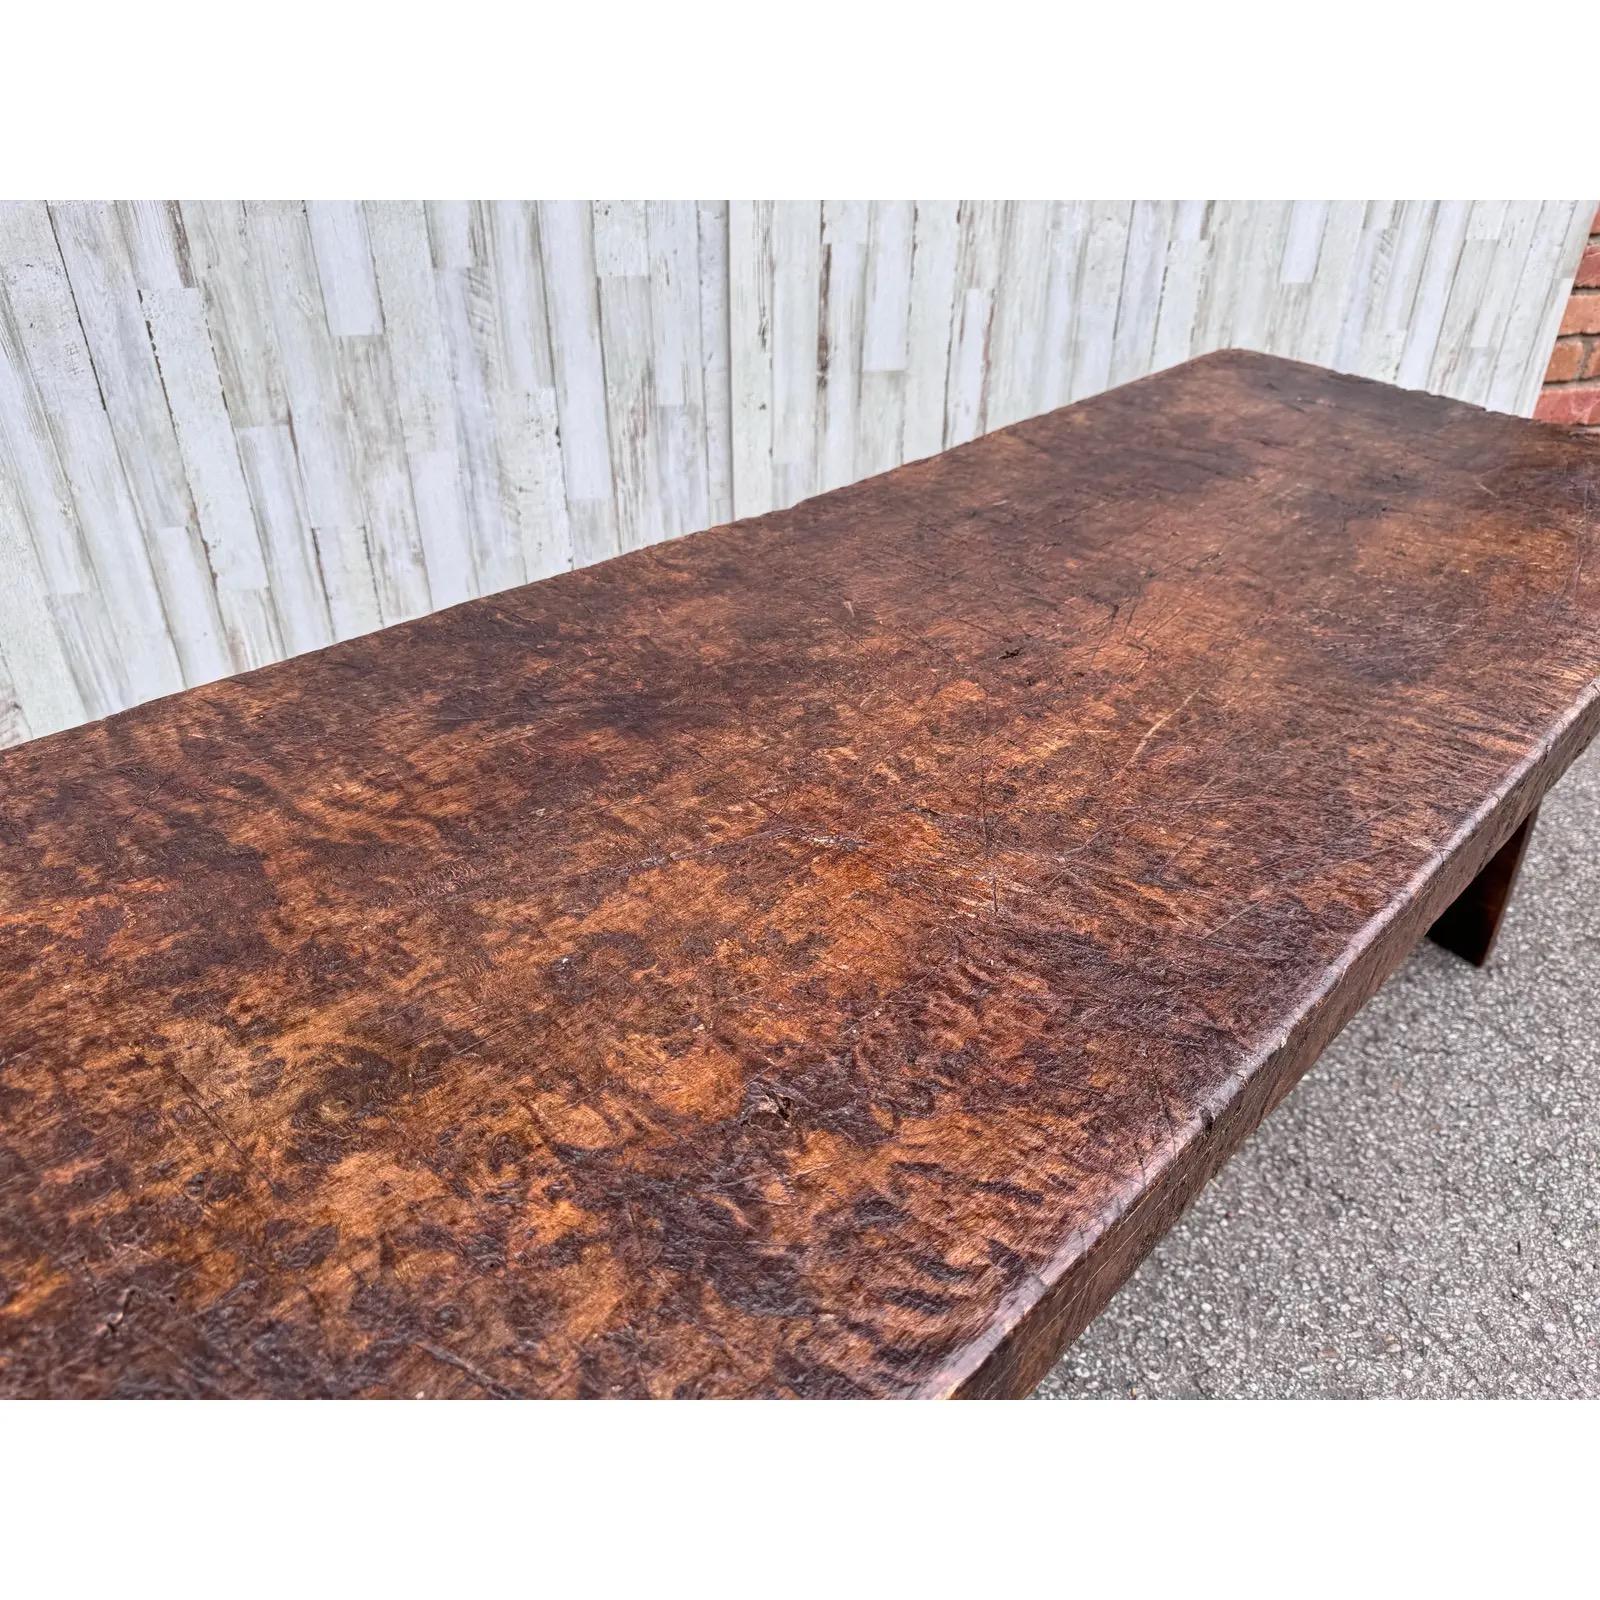 This is a beautiful little English coffee table! Originally this table would have been used as a chopping block in a butcher's shop. The top is marked with knife marks from years of use. It has developed a great patina over the years, and now the